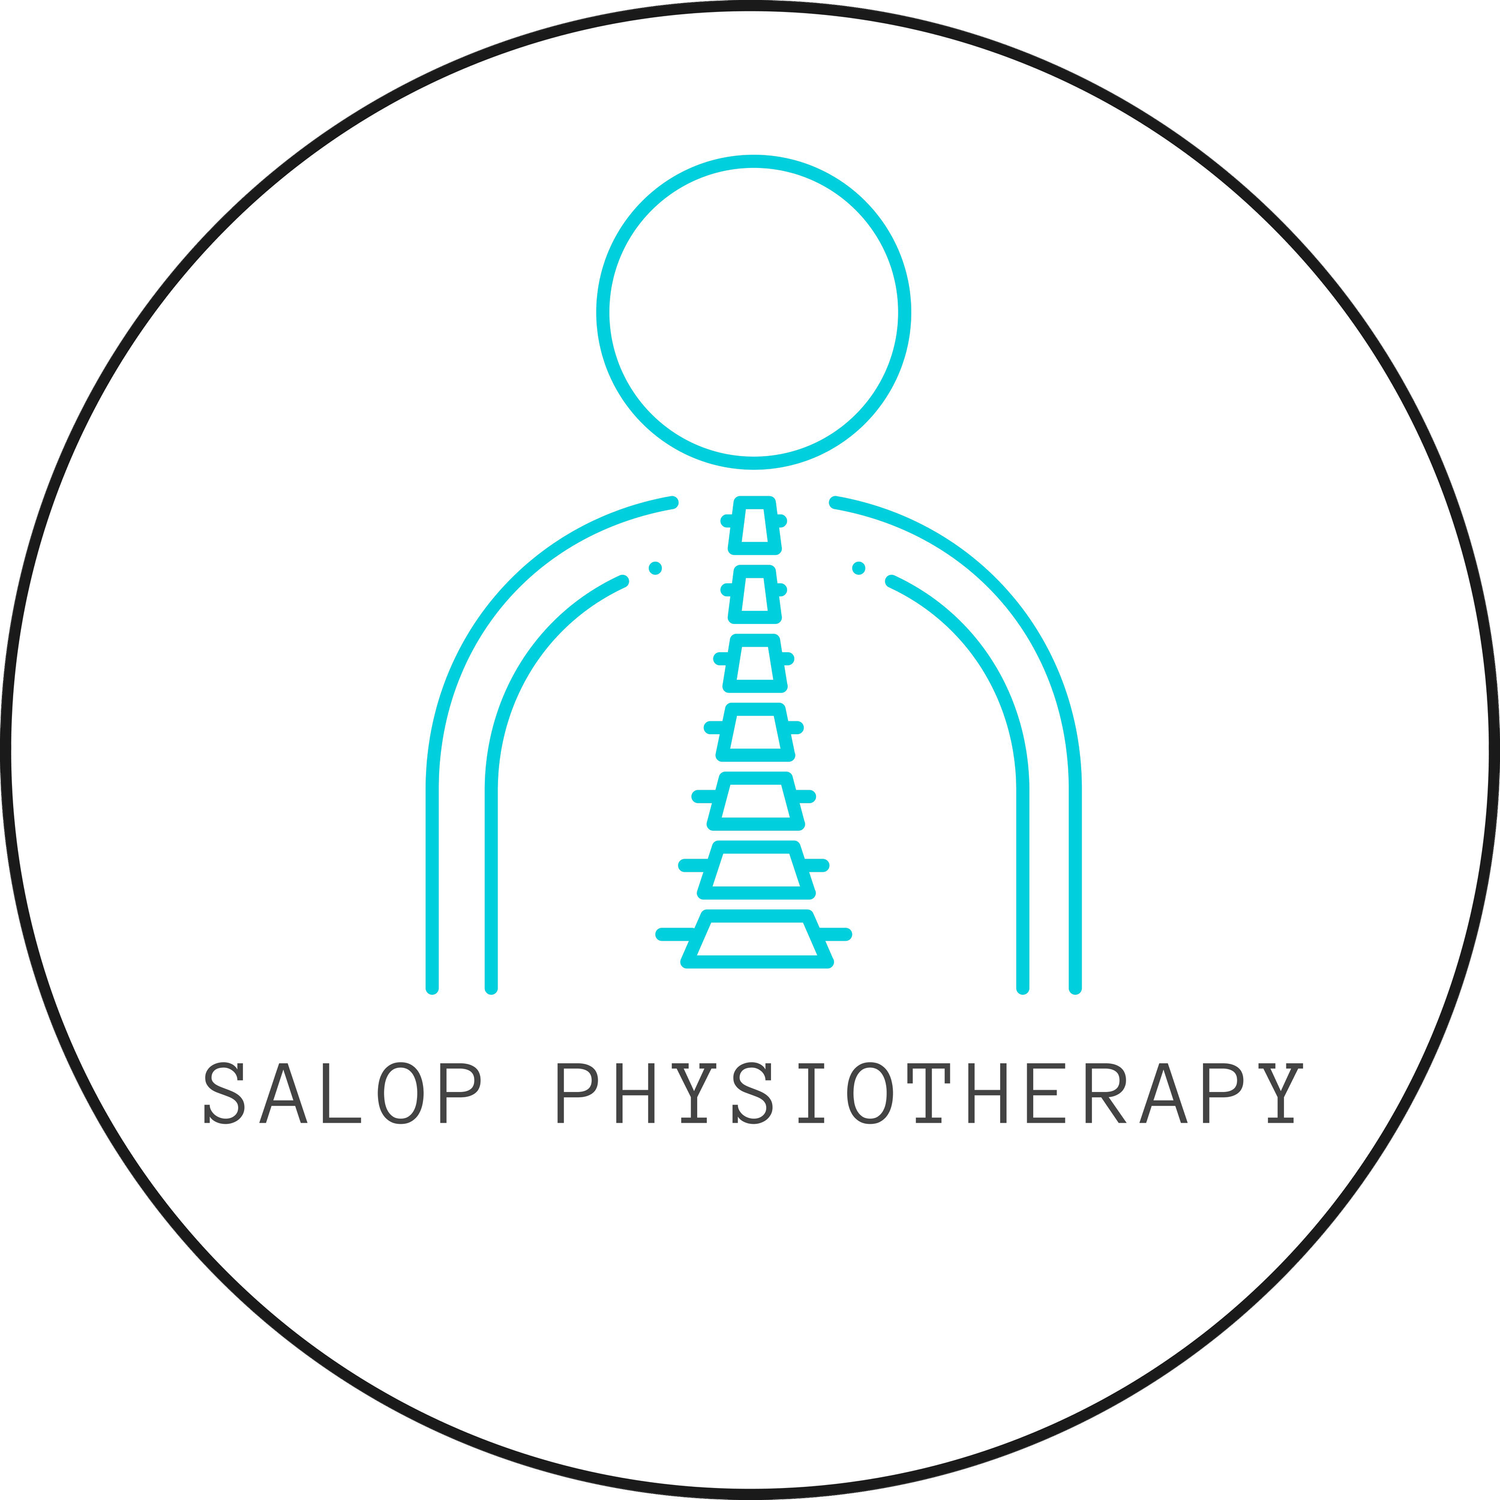 Salop Physiotherapy